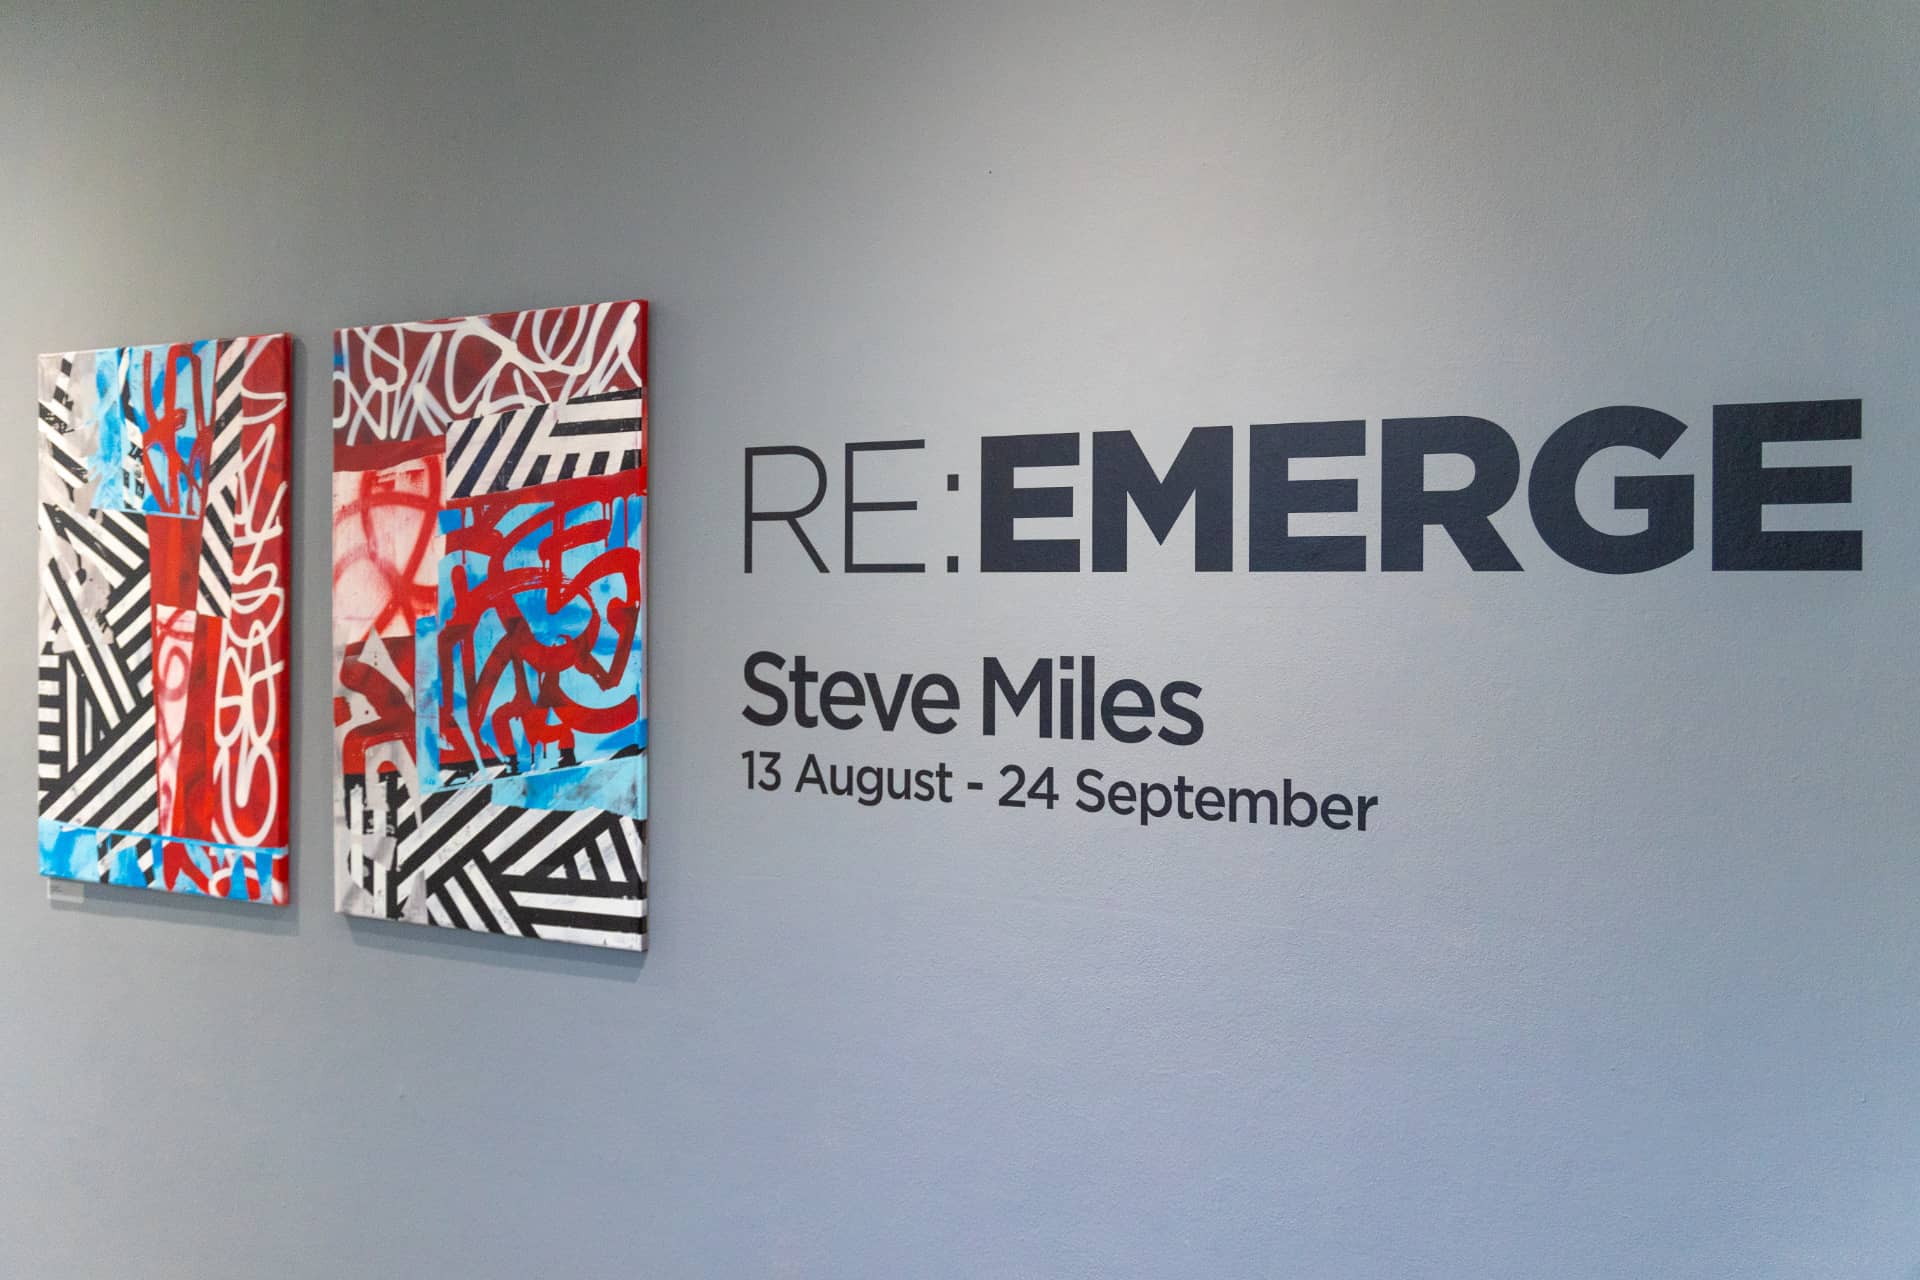 RE:EMERGE Exhibition at Quay Arts 2022